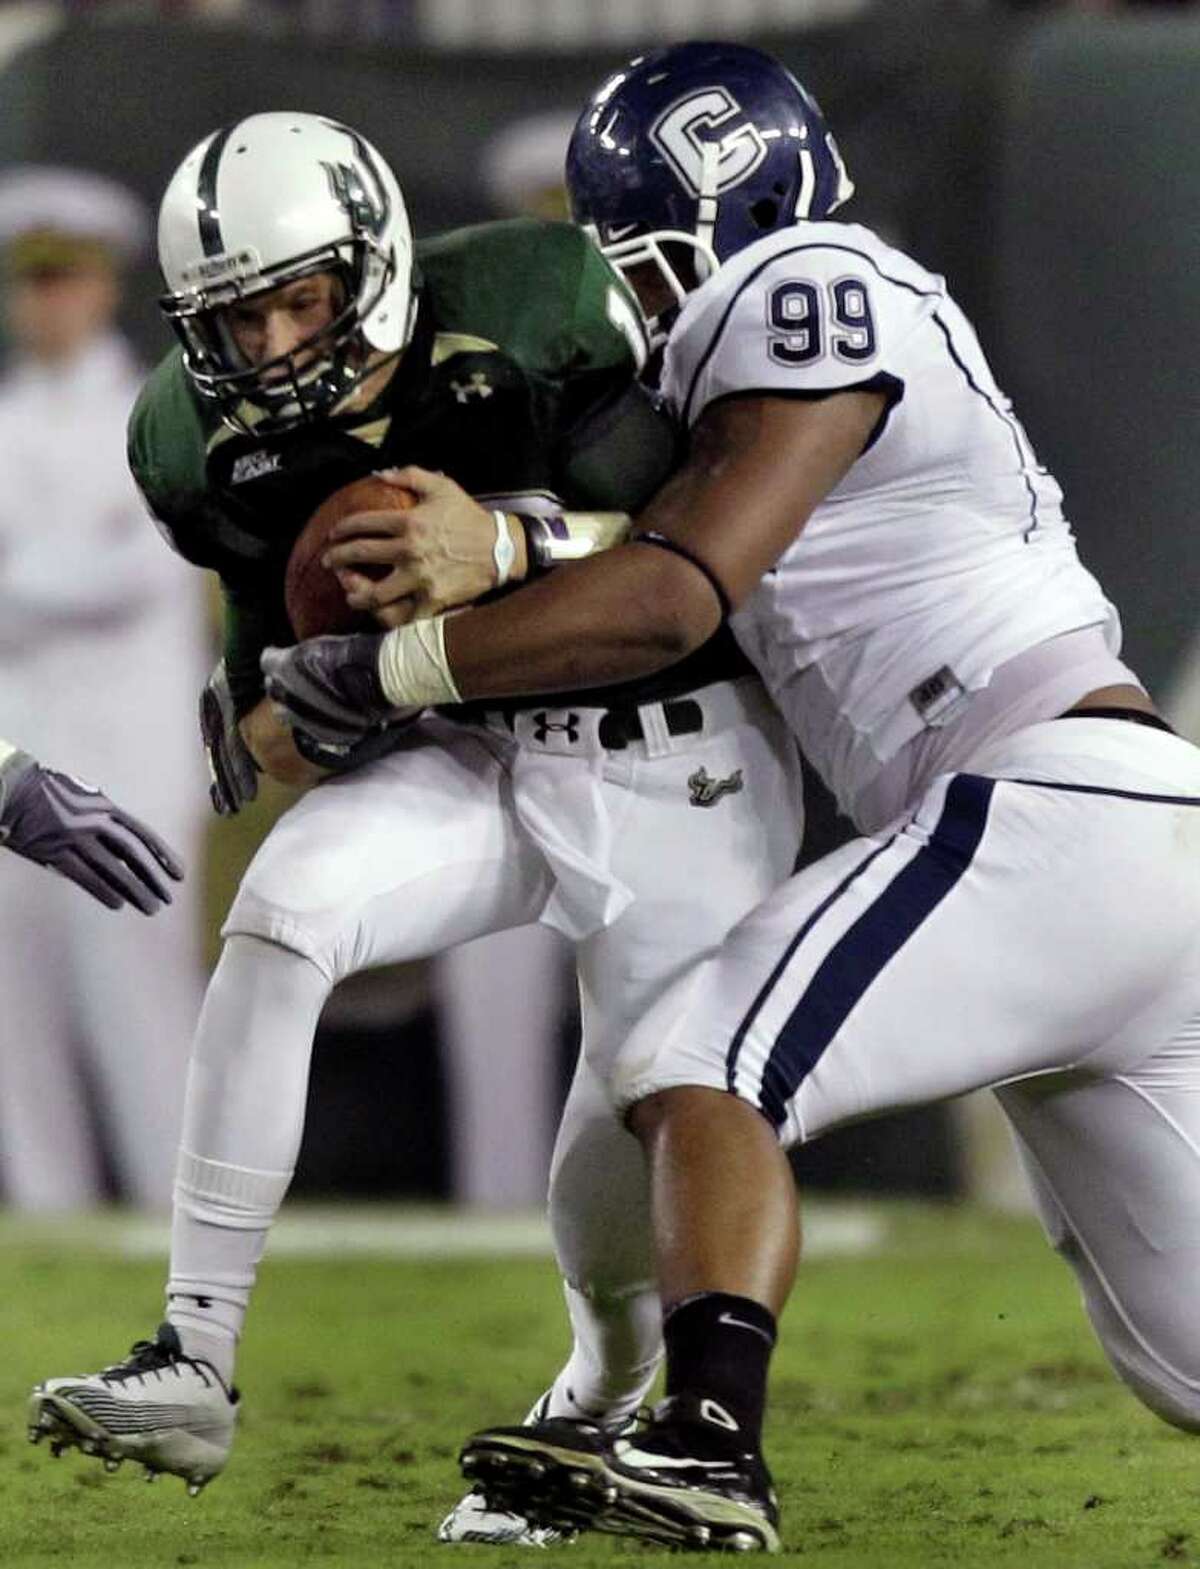 Connecticut defensive tackle Kendall Reyes (99) sacks South Florida quarterback Bobby Eveld during the first quarter of an NCAA college football game Saturday, Dec. 4, 2010, in Tampa, Fla. (AP Photo/Chris O'Meara)